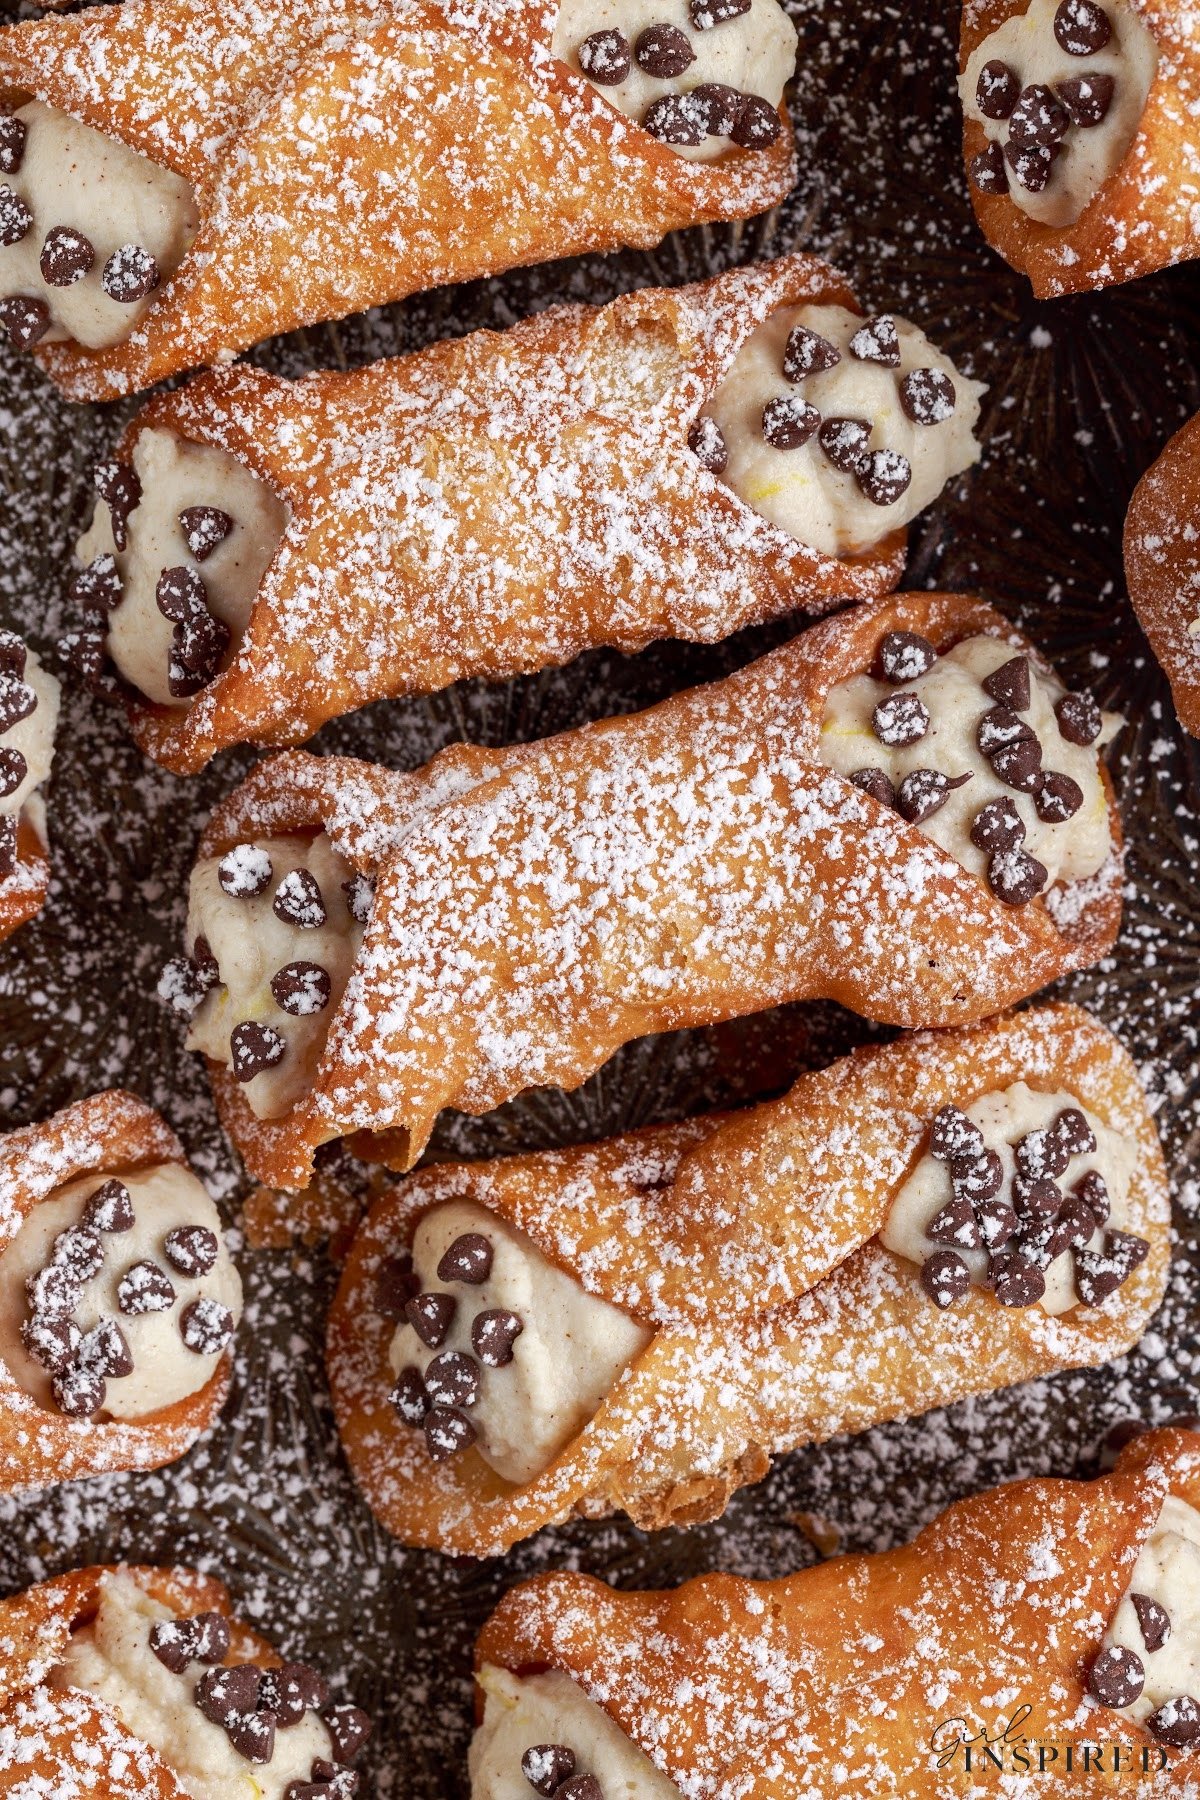 Finished Cannoli's on a platter.